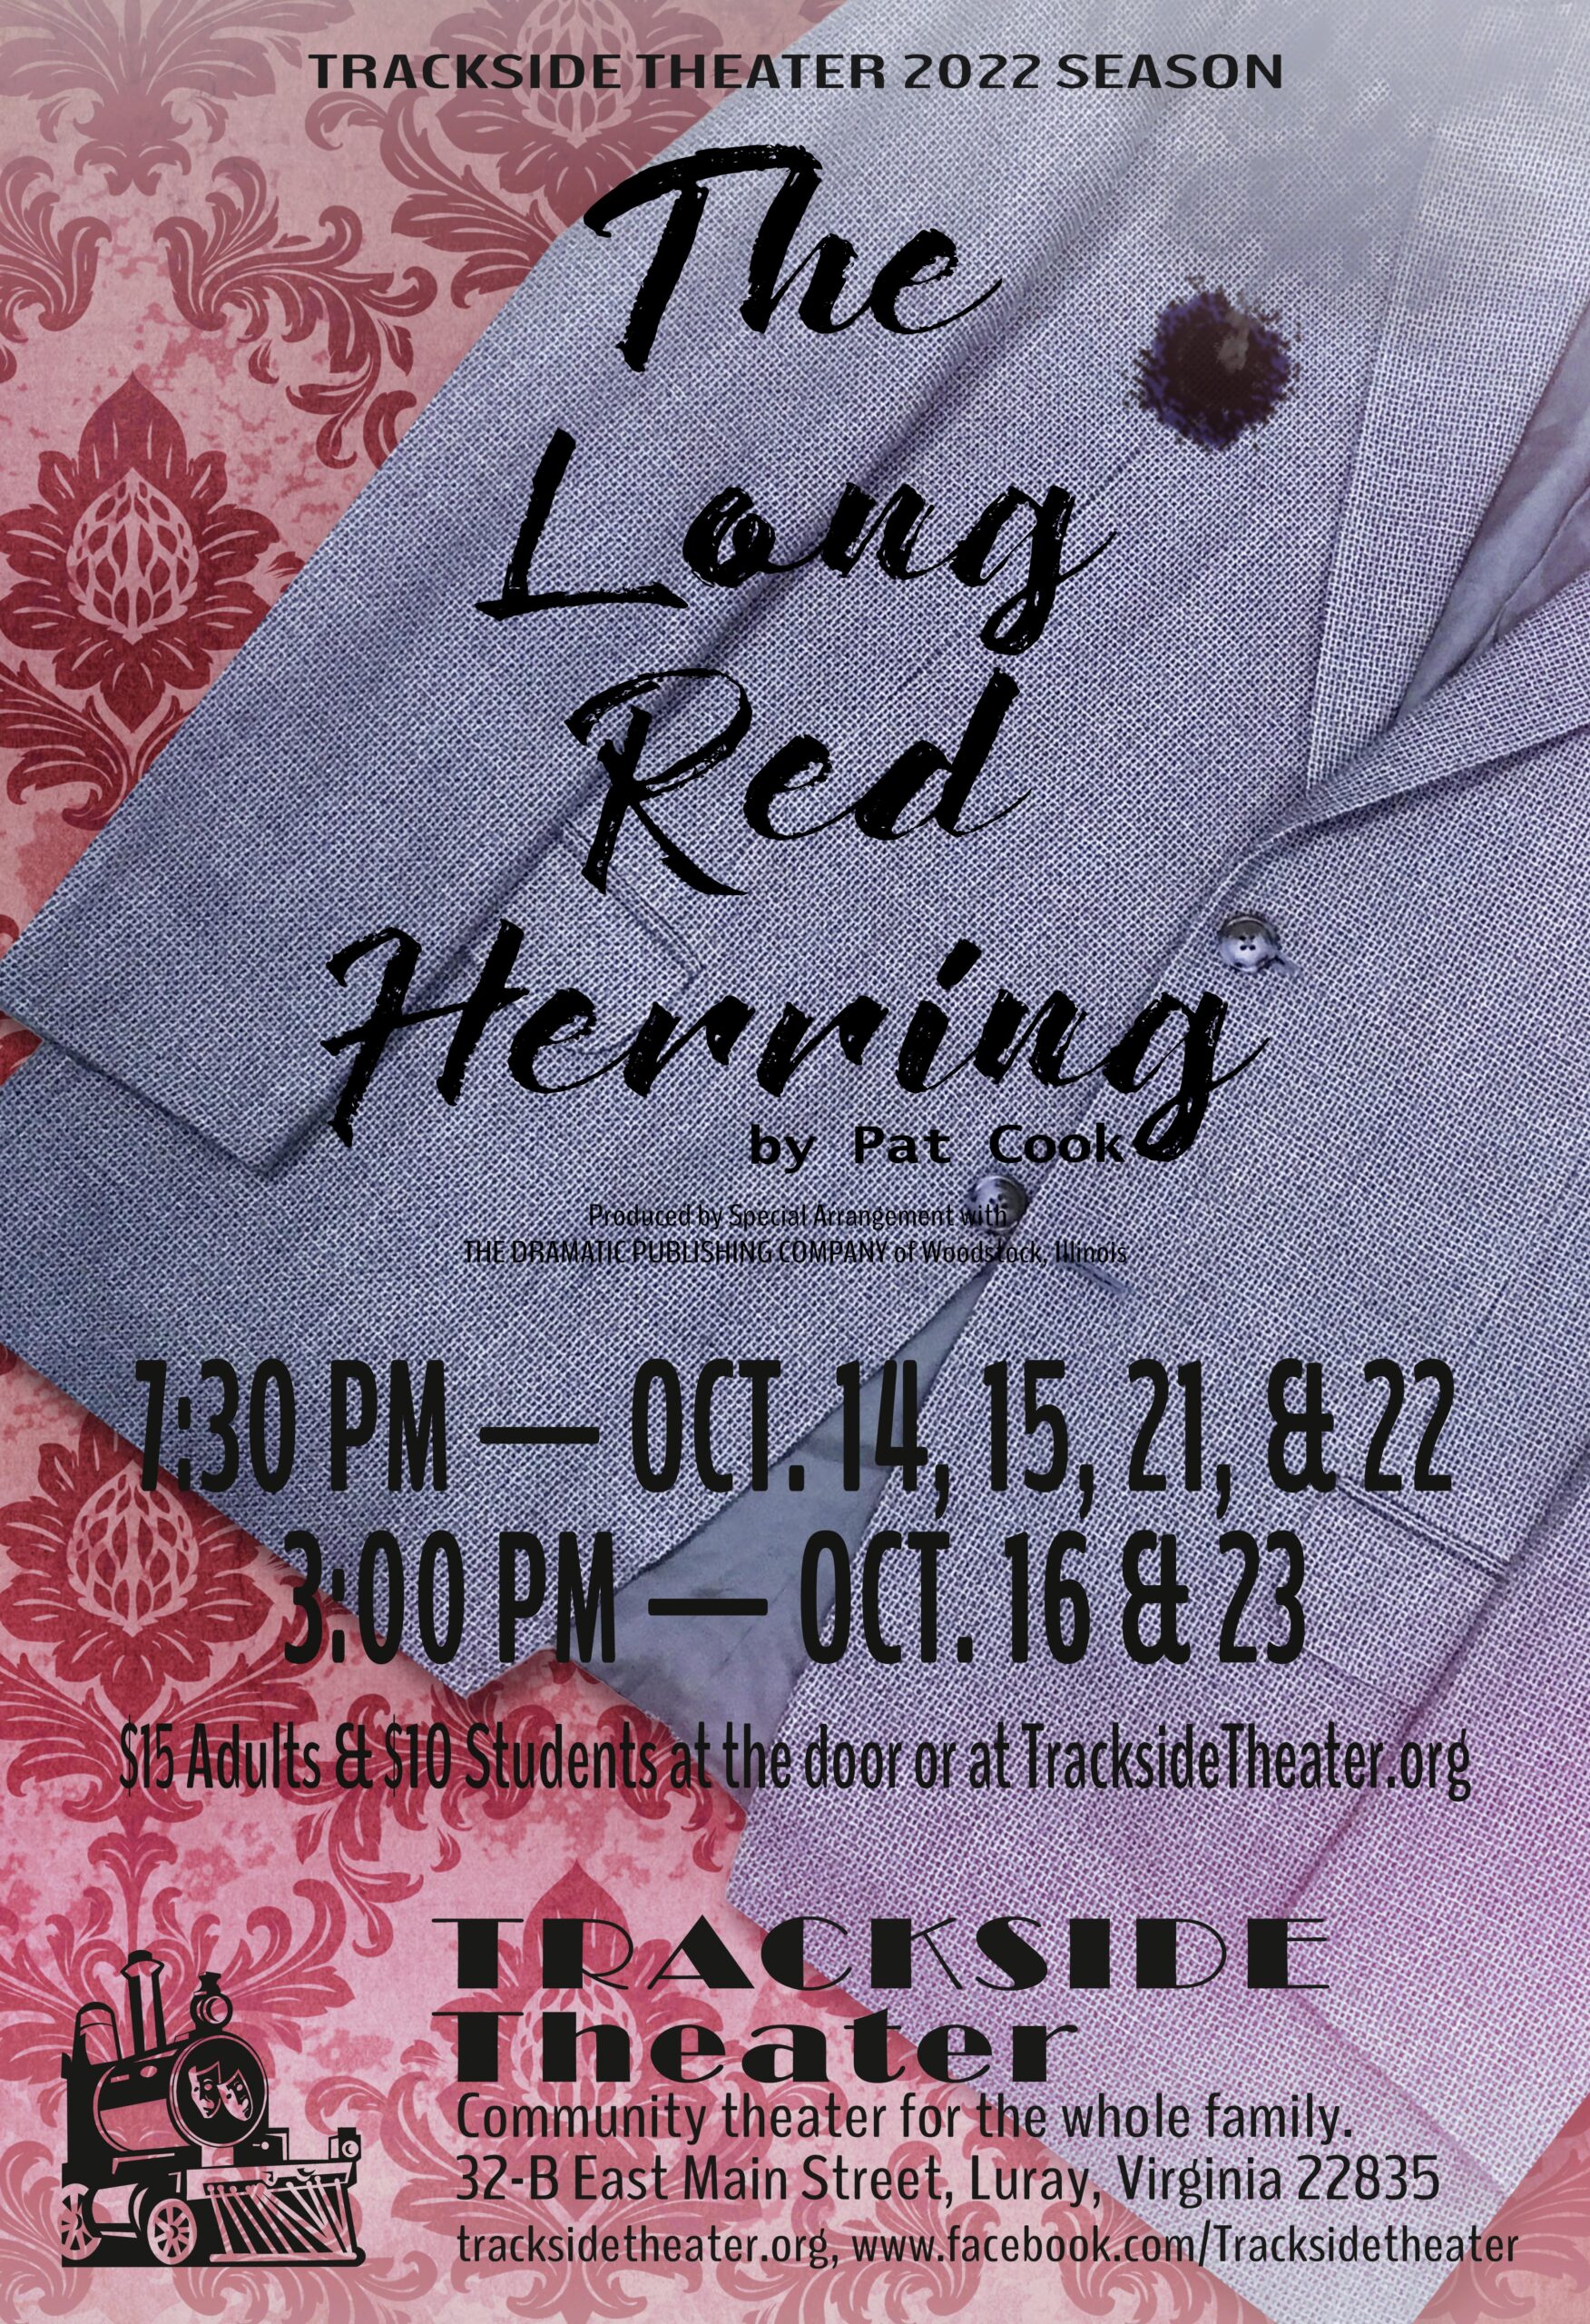 promotional poster for comedy thriller play the long red herring by pat cook